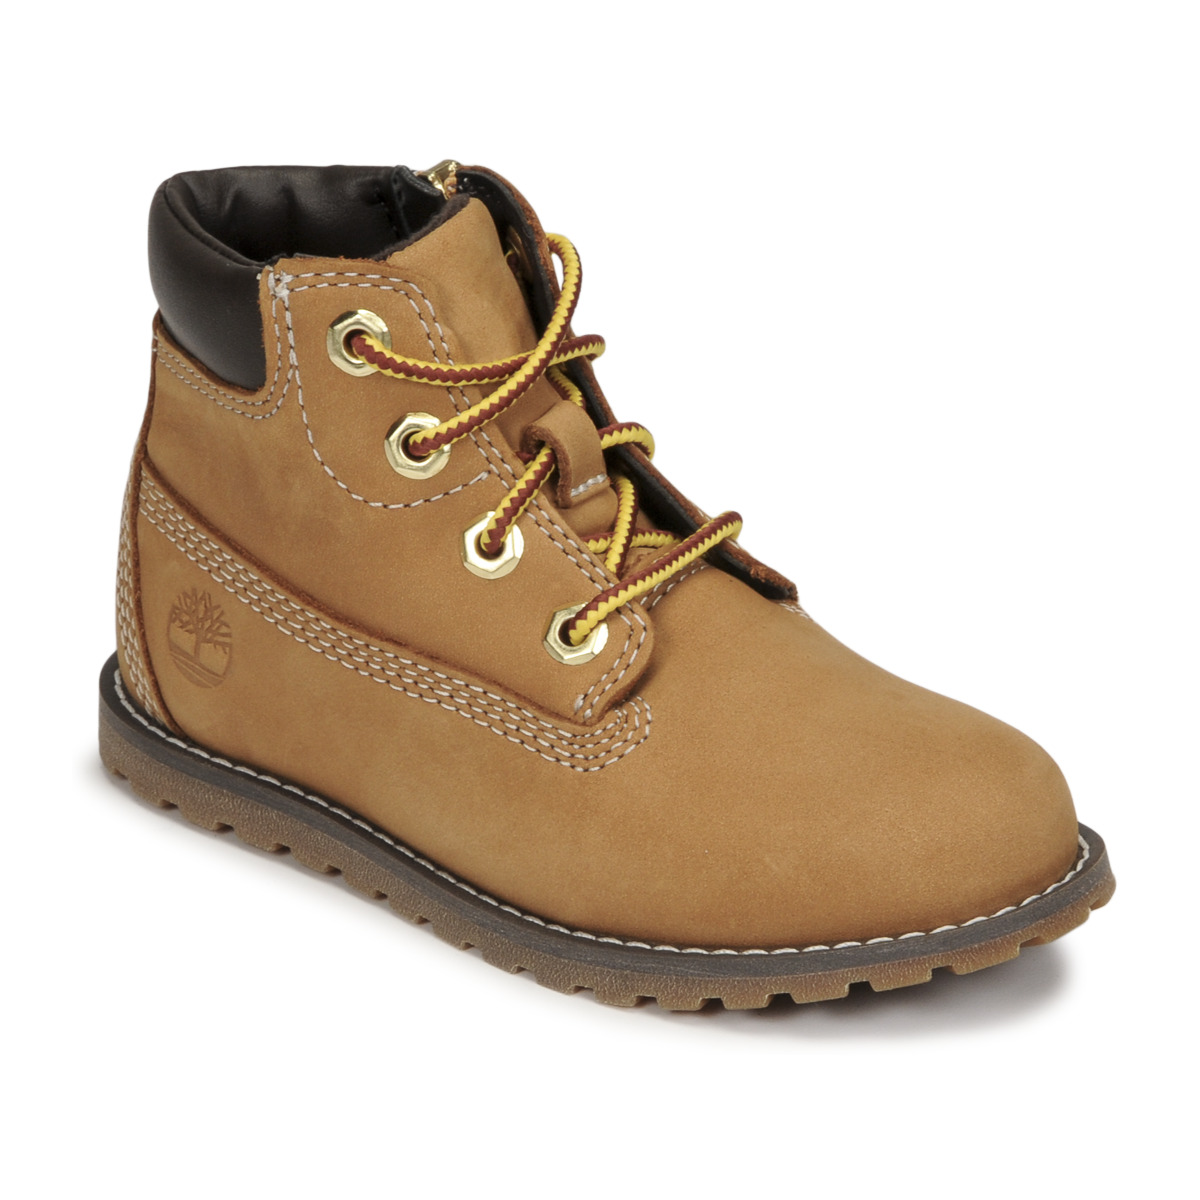 Timberland Marron POKEY PINE 6IN BOOT nXTeS0Dt